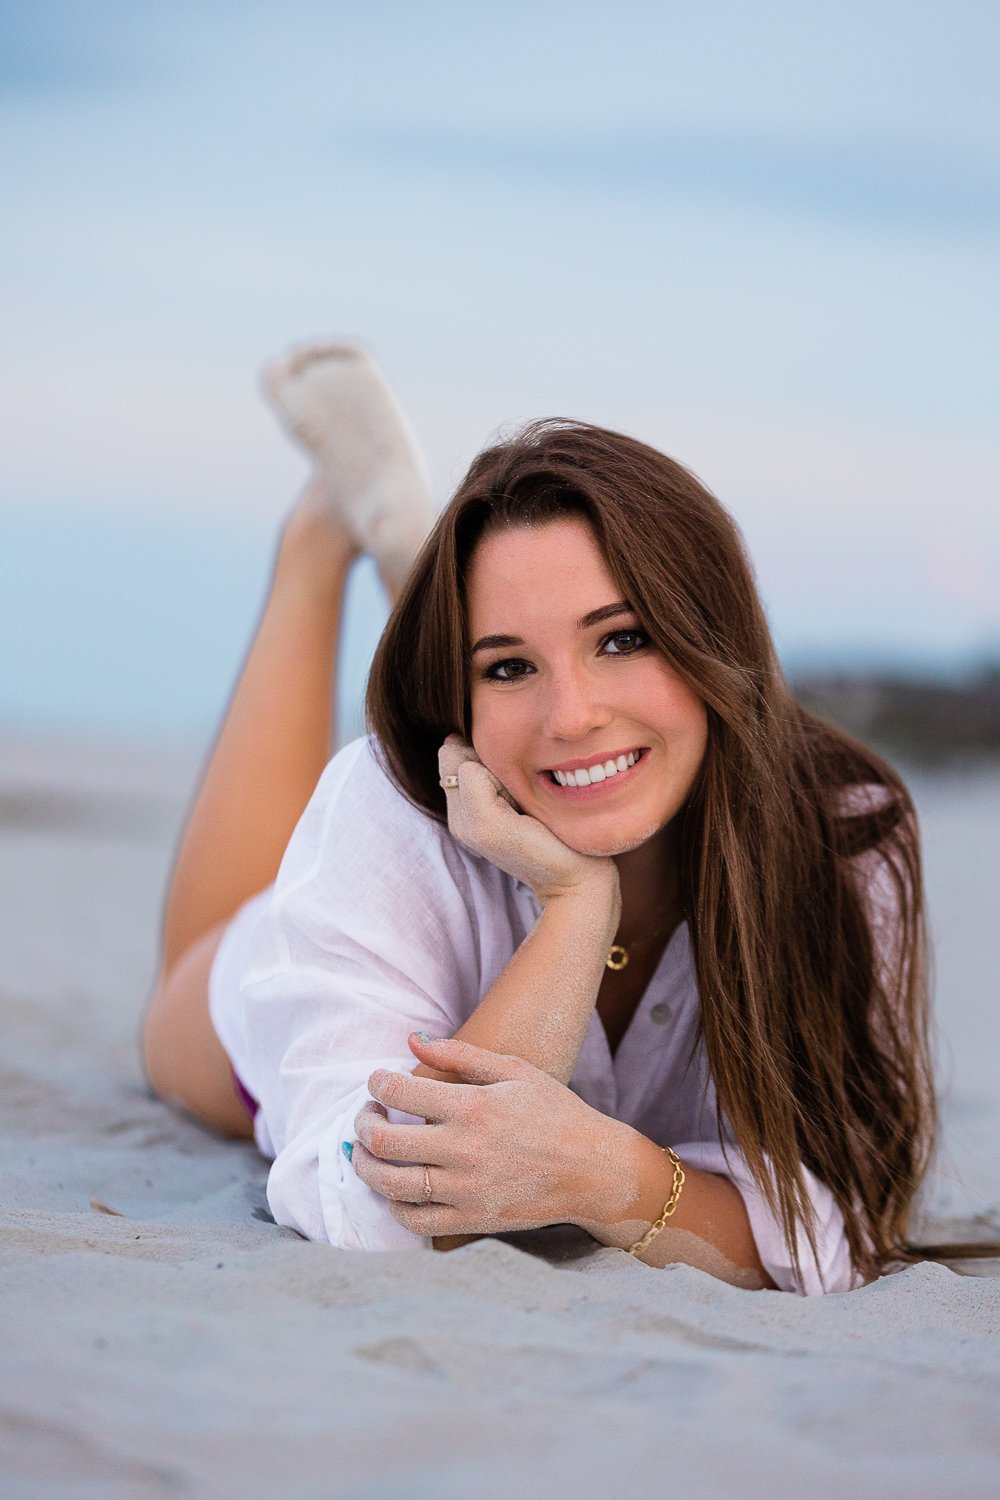 Cute and adorable senior girl picture inspiration ideas